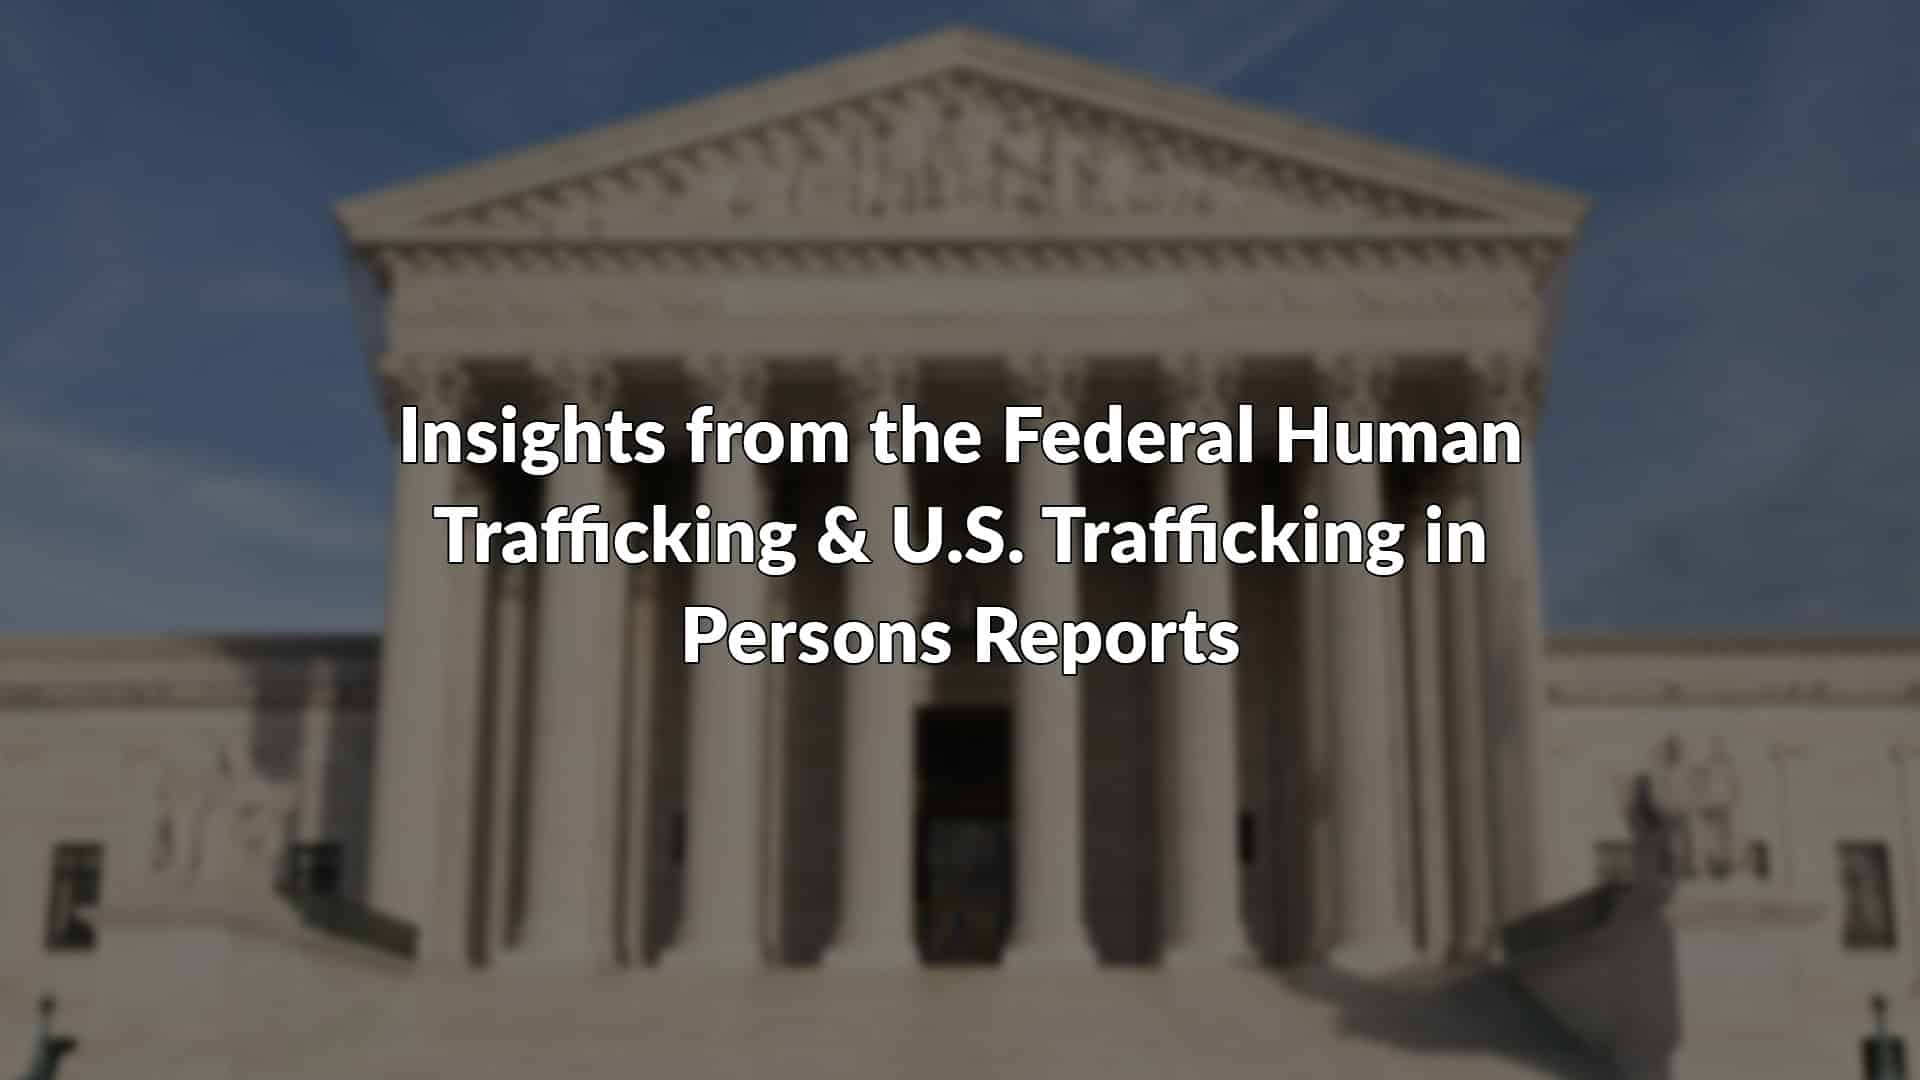 Insights from the Federal Human Trafficking & U.S. Trafficking in Persons Reports